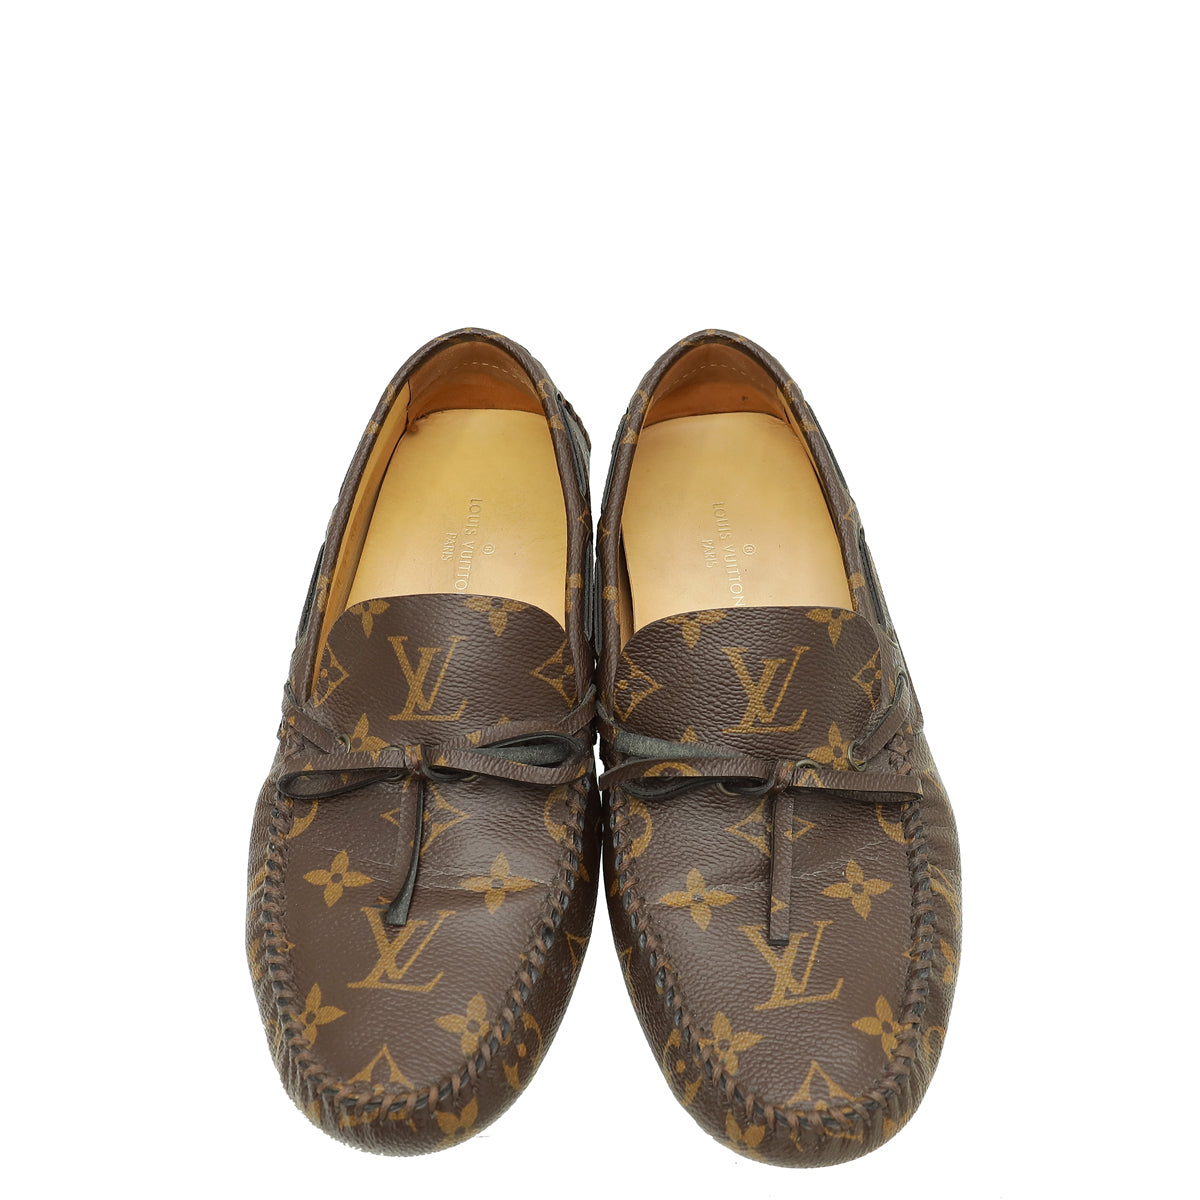 Louis Vuitton Monogram Driver Moccasin Loafer 5.5